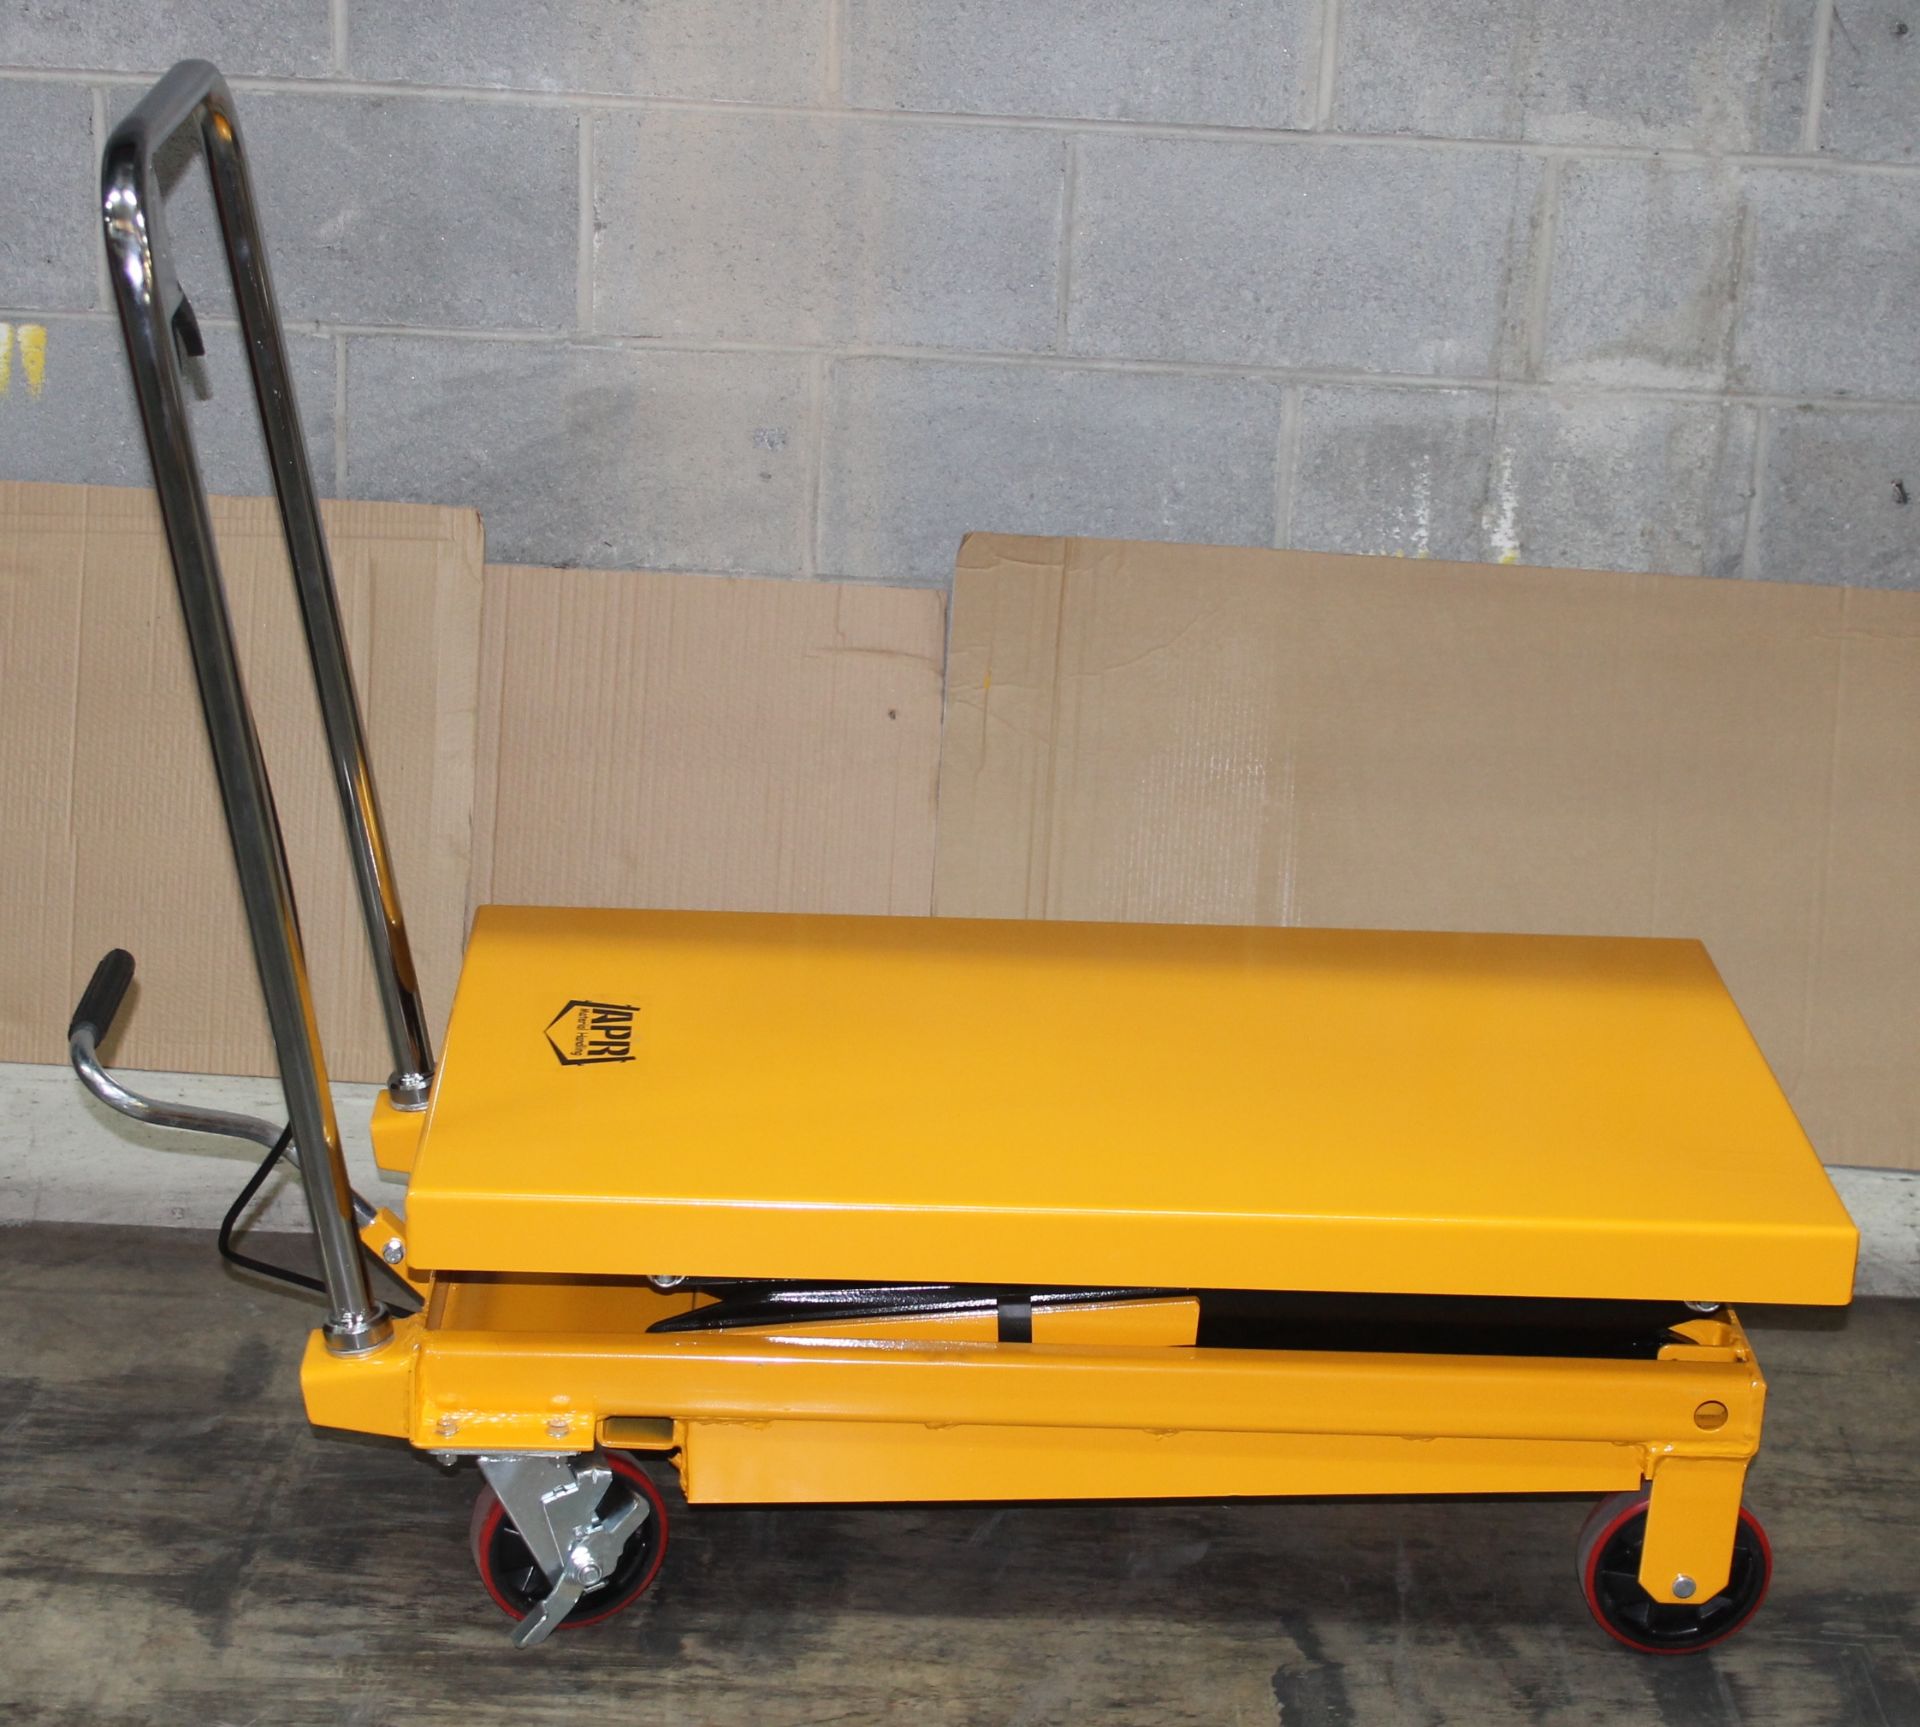 770 LBS CAP. SCISSORS ROLLING LIFT TABLE, NEW,  CAPACITY: 770 LBS, MAX HEIGHT: 51", TABLE